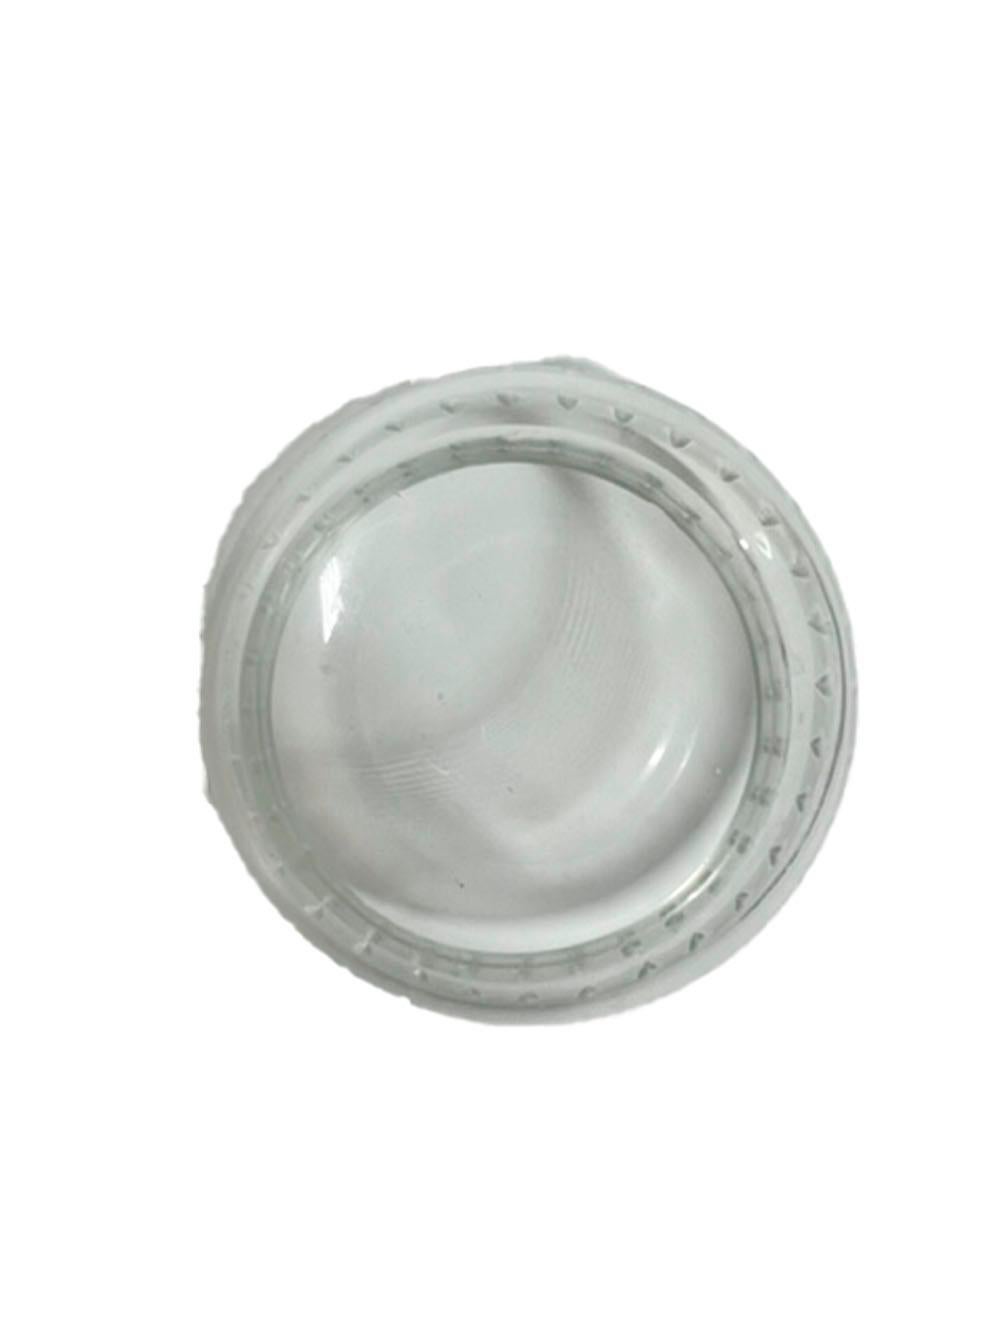 Silver Plate Art Deco Condiment / Garnish Jar in the Form of a Curling Stone For Sale